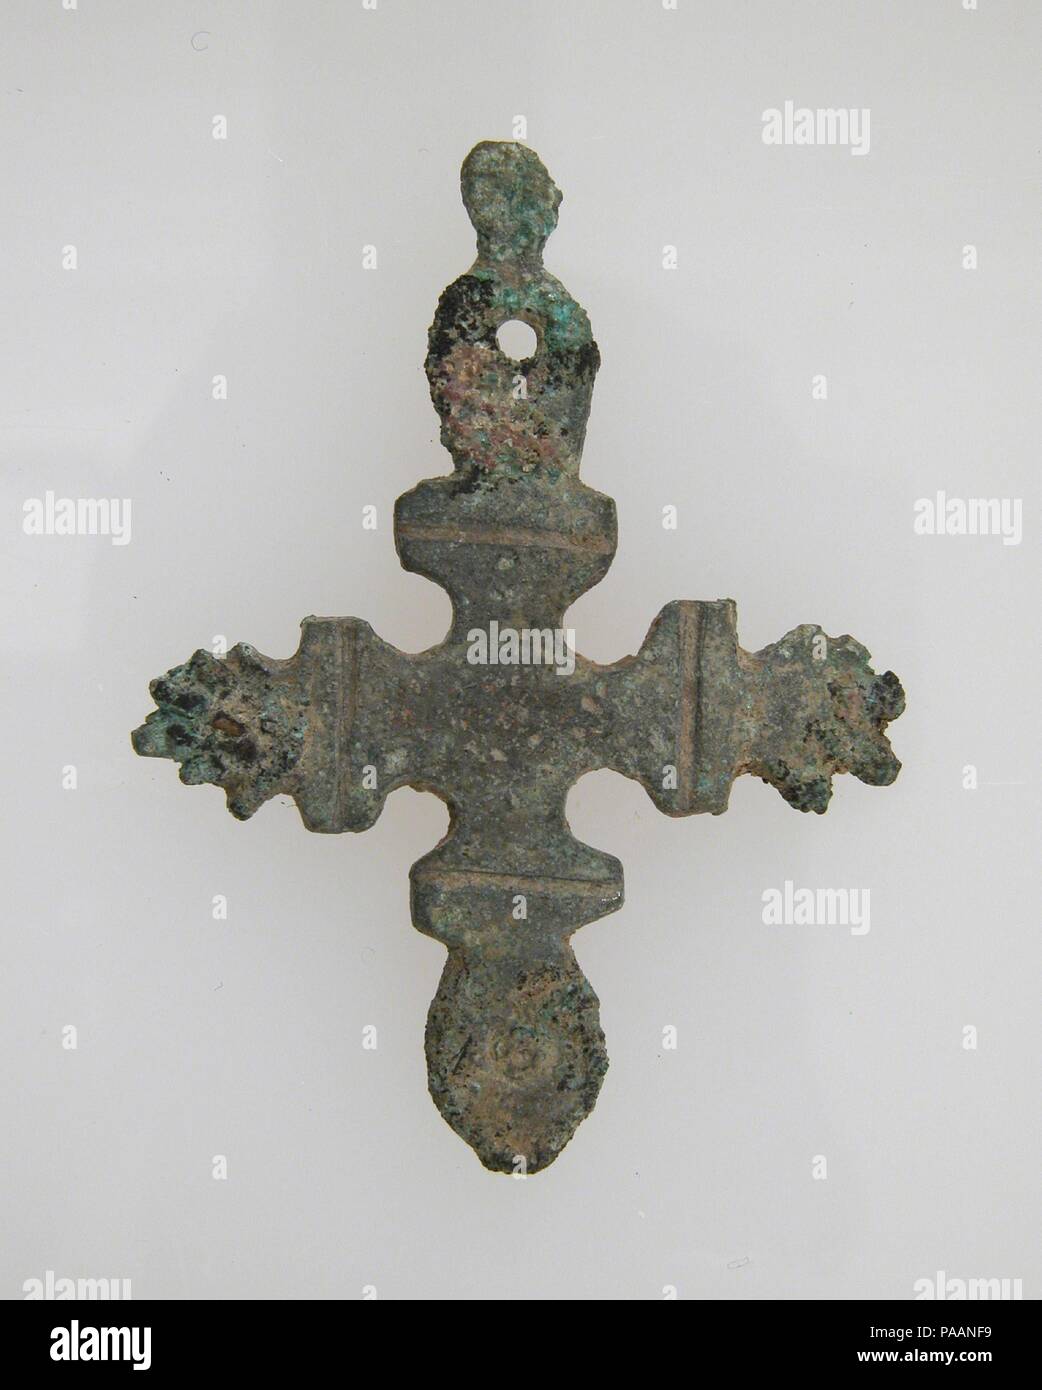 Cross. Culture: Frankish. Dimensions: Overall: 1 9/16 x 1 3/16 x 1/16 in. (4 x 3 x 0.1 cm). Date: 500-600. Museum: Metropolitan Museum of Art, New York, USA. Stock Photo